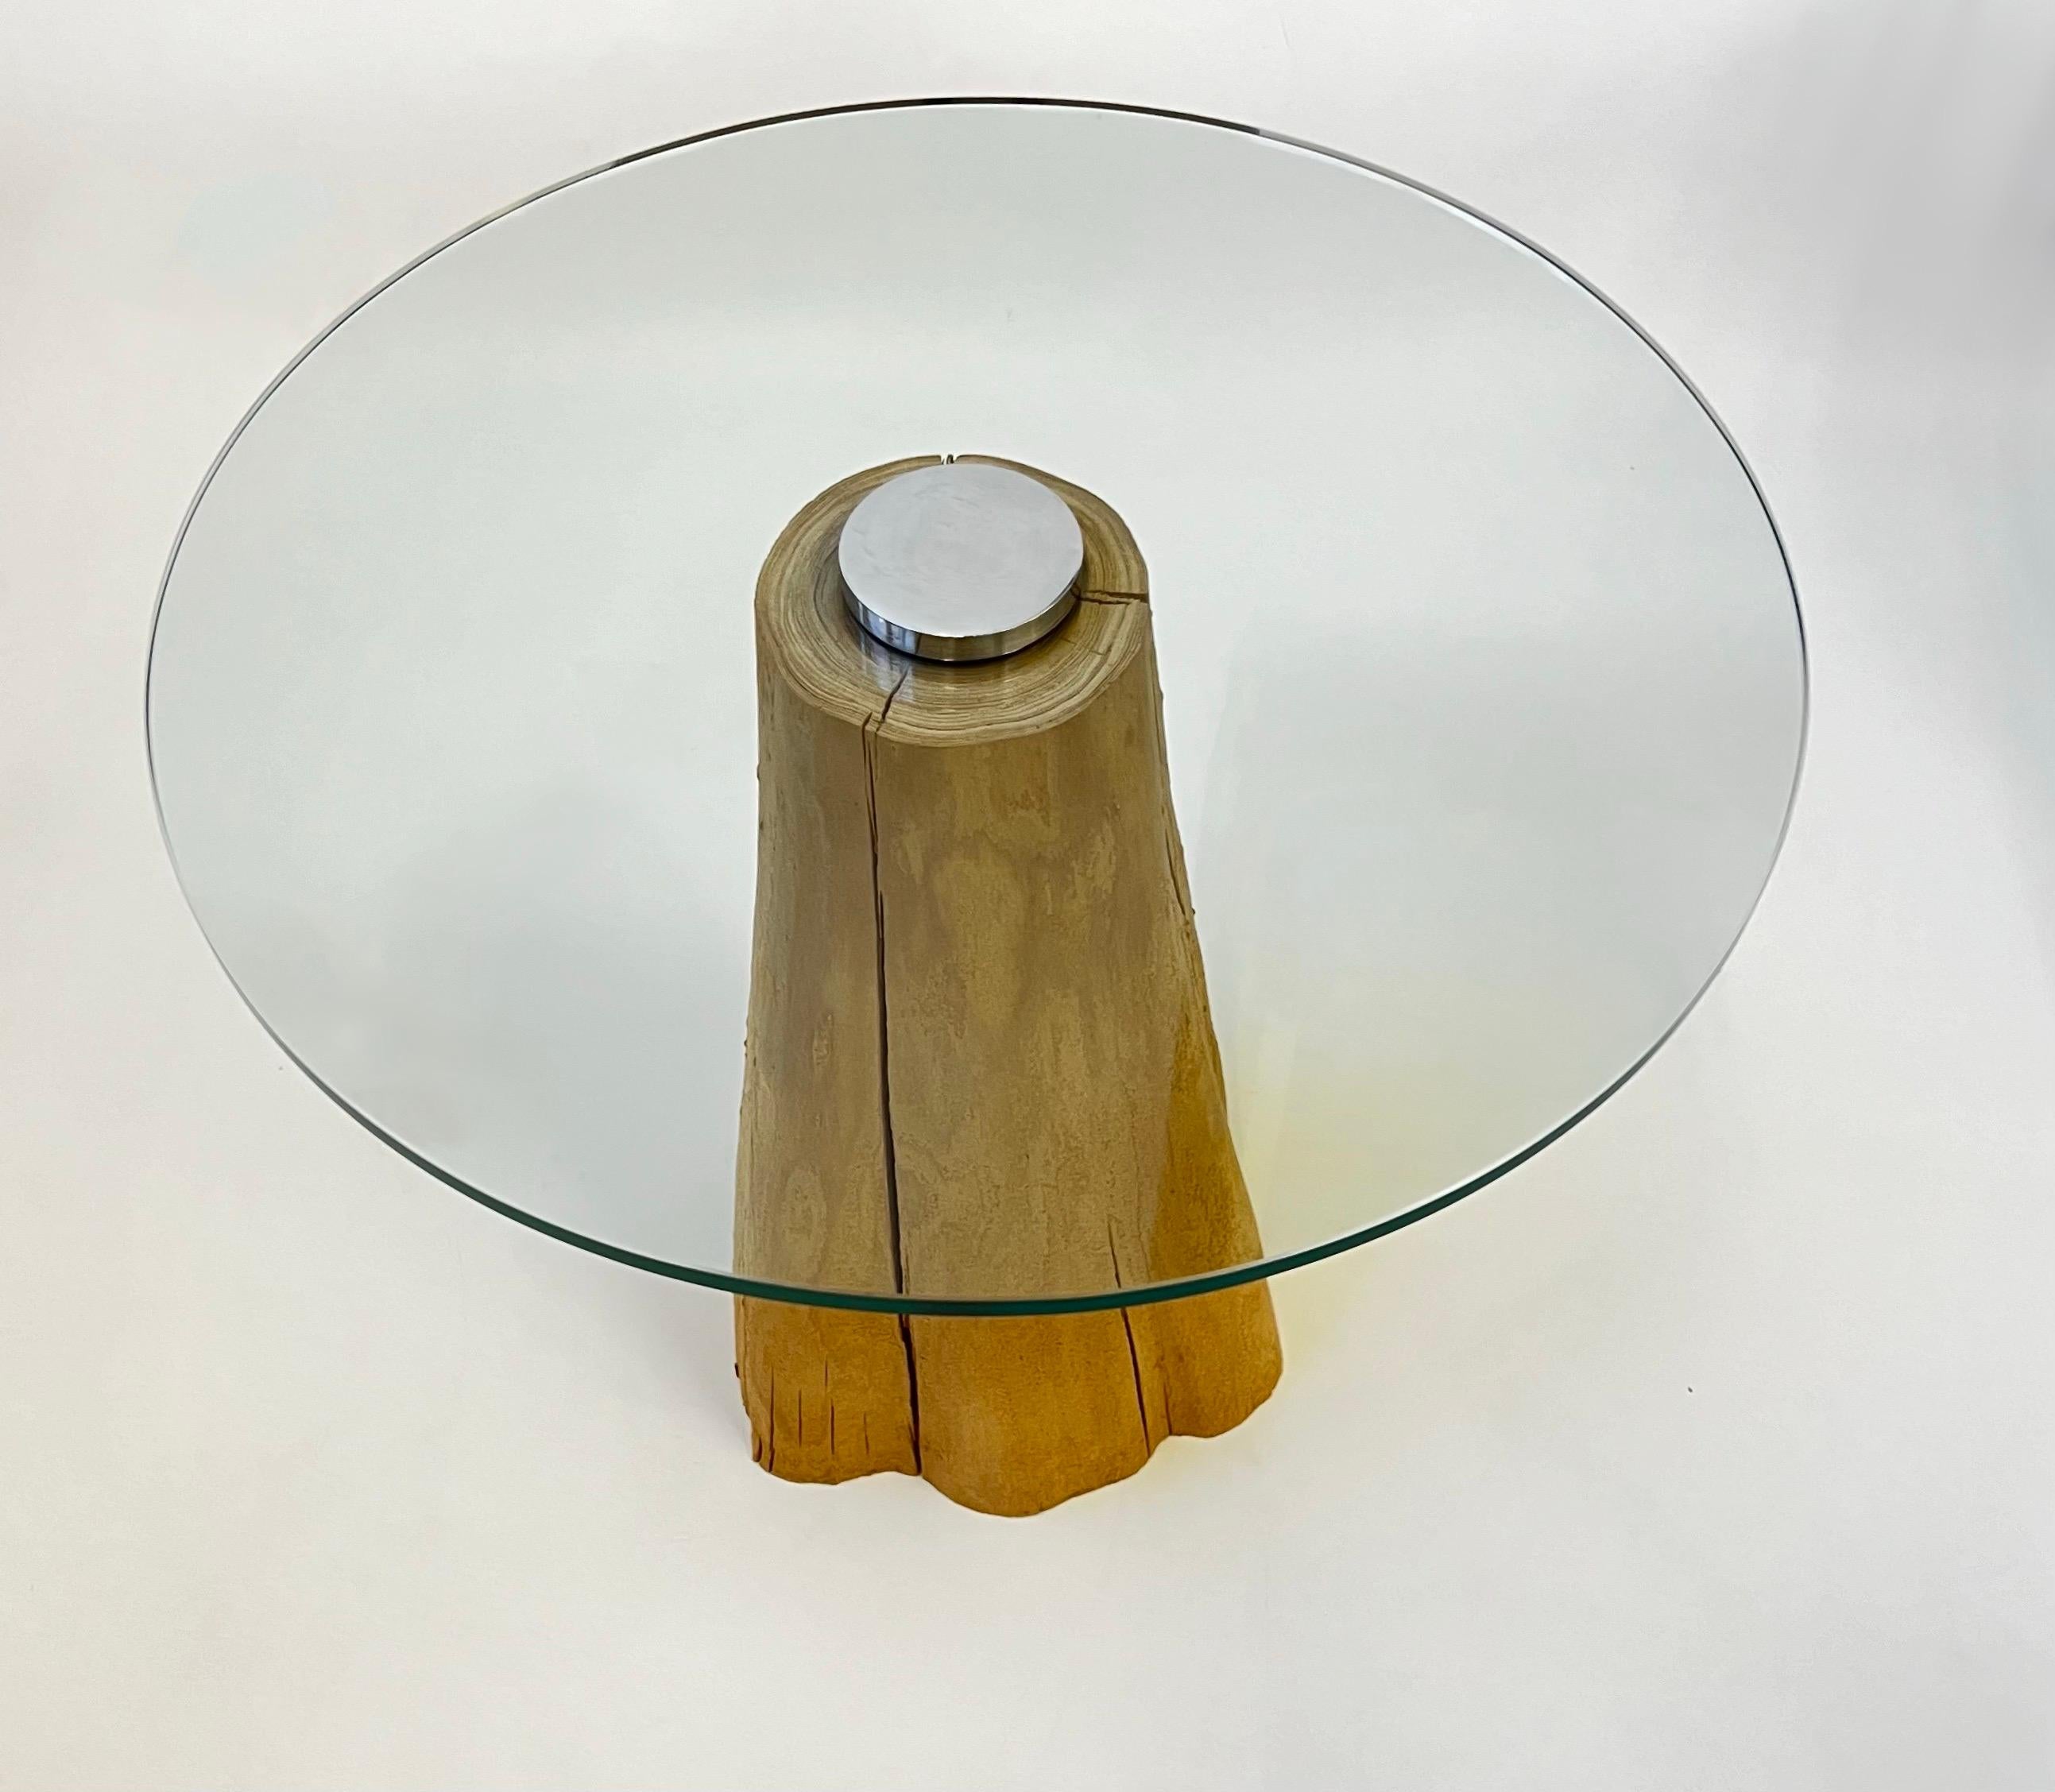 A beautiful 1970s wood stump with a round glass top side table by Michael Taylor. New 1/2” thick glass top. The hardware that holds the glass top to the stump is polish aluminum. 

Dimension: 20” diameter, 16.25” high.